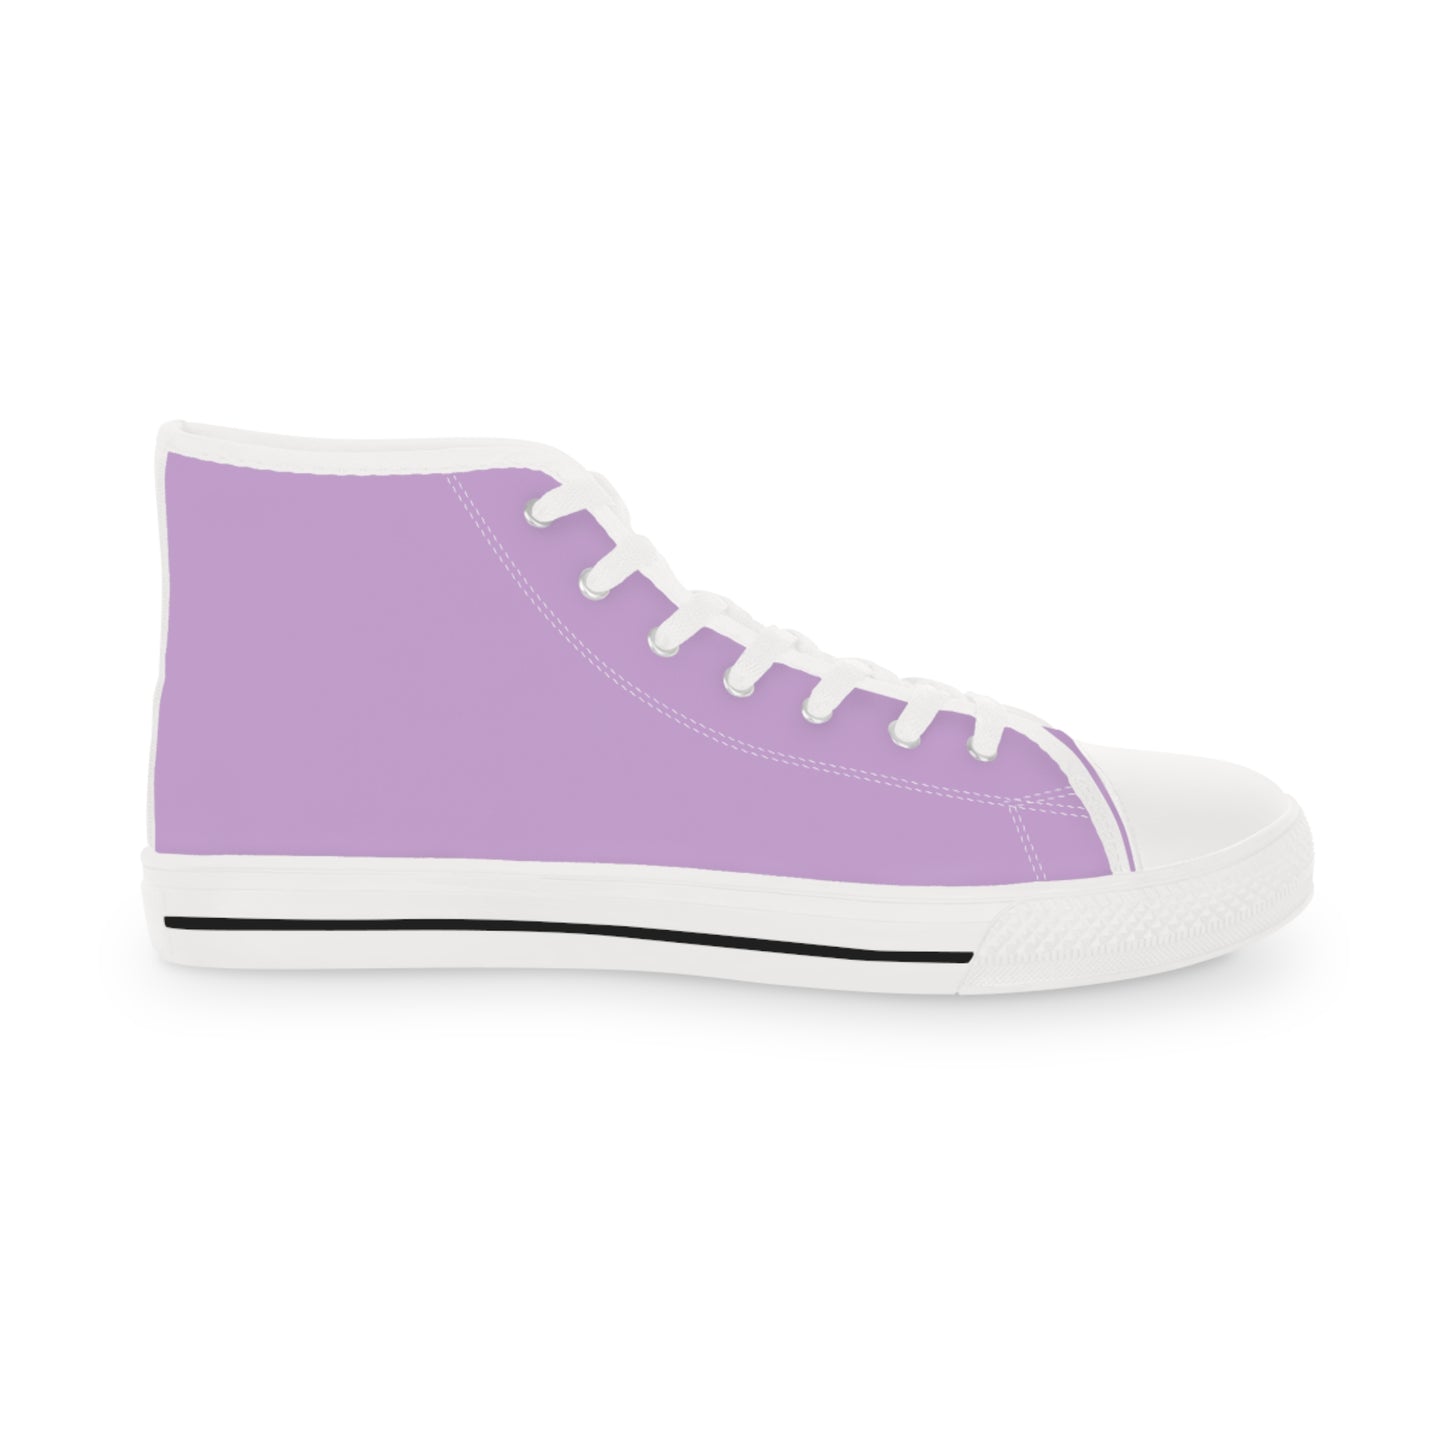 Men's Canvas High Top Solid Color Sneakers - Pinky Purple US 14 White sole